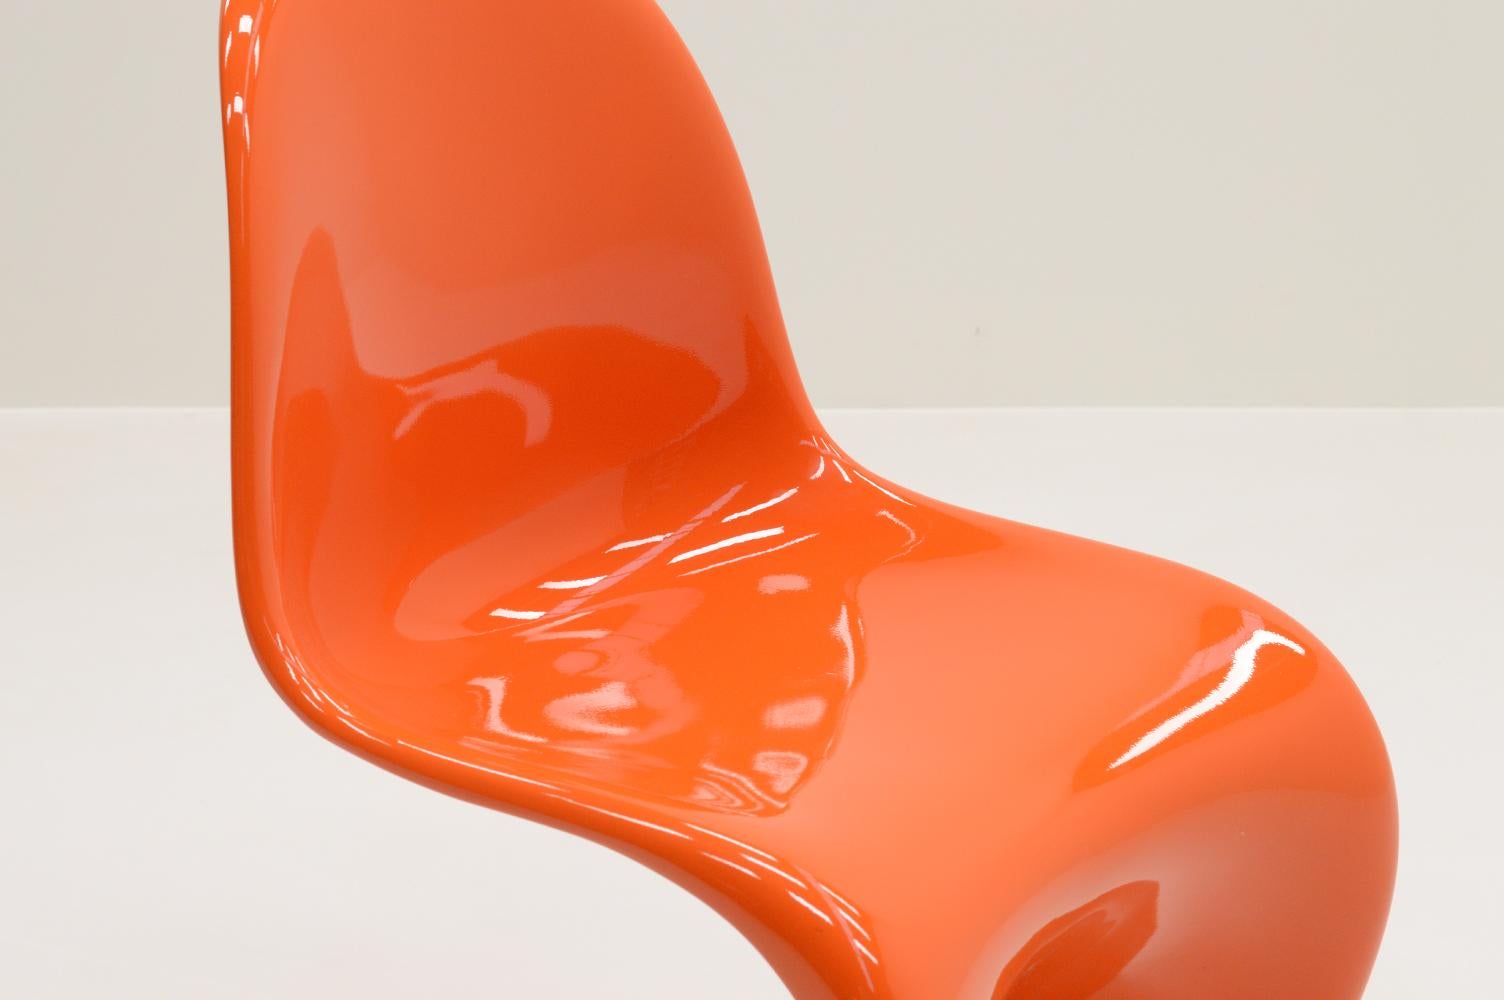 Space Age Rare 1st edition Panton chair by Verner Panton for Herman Miller 1968. 